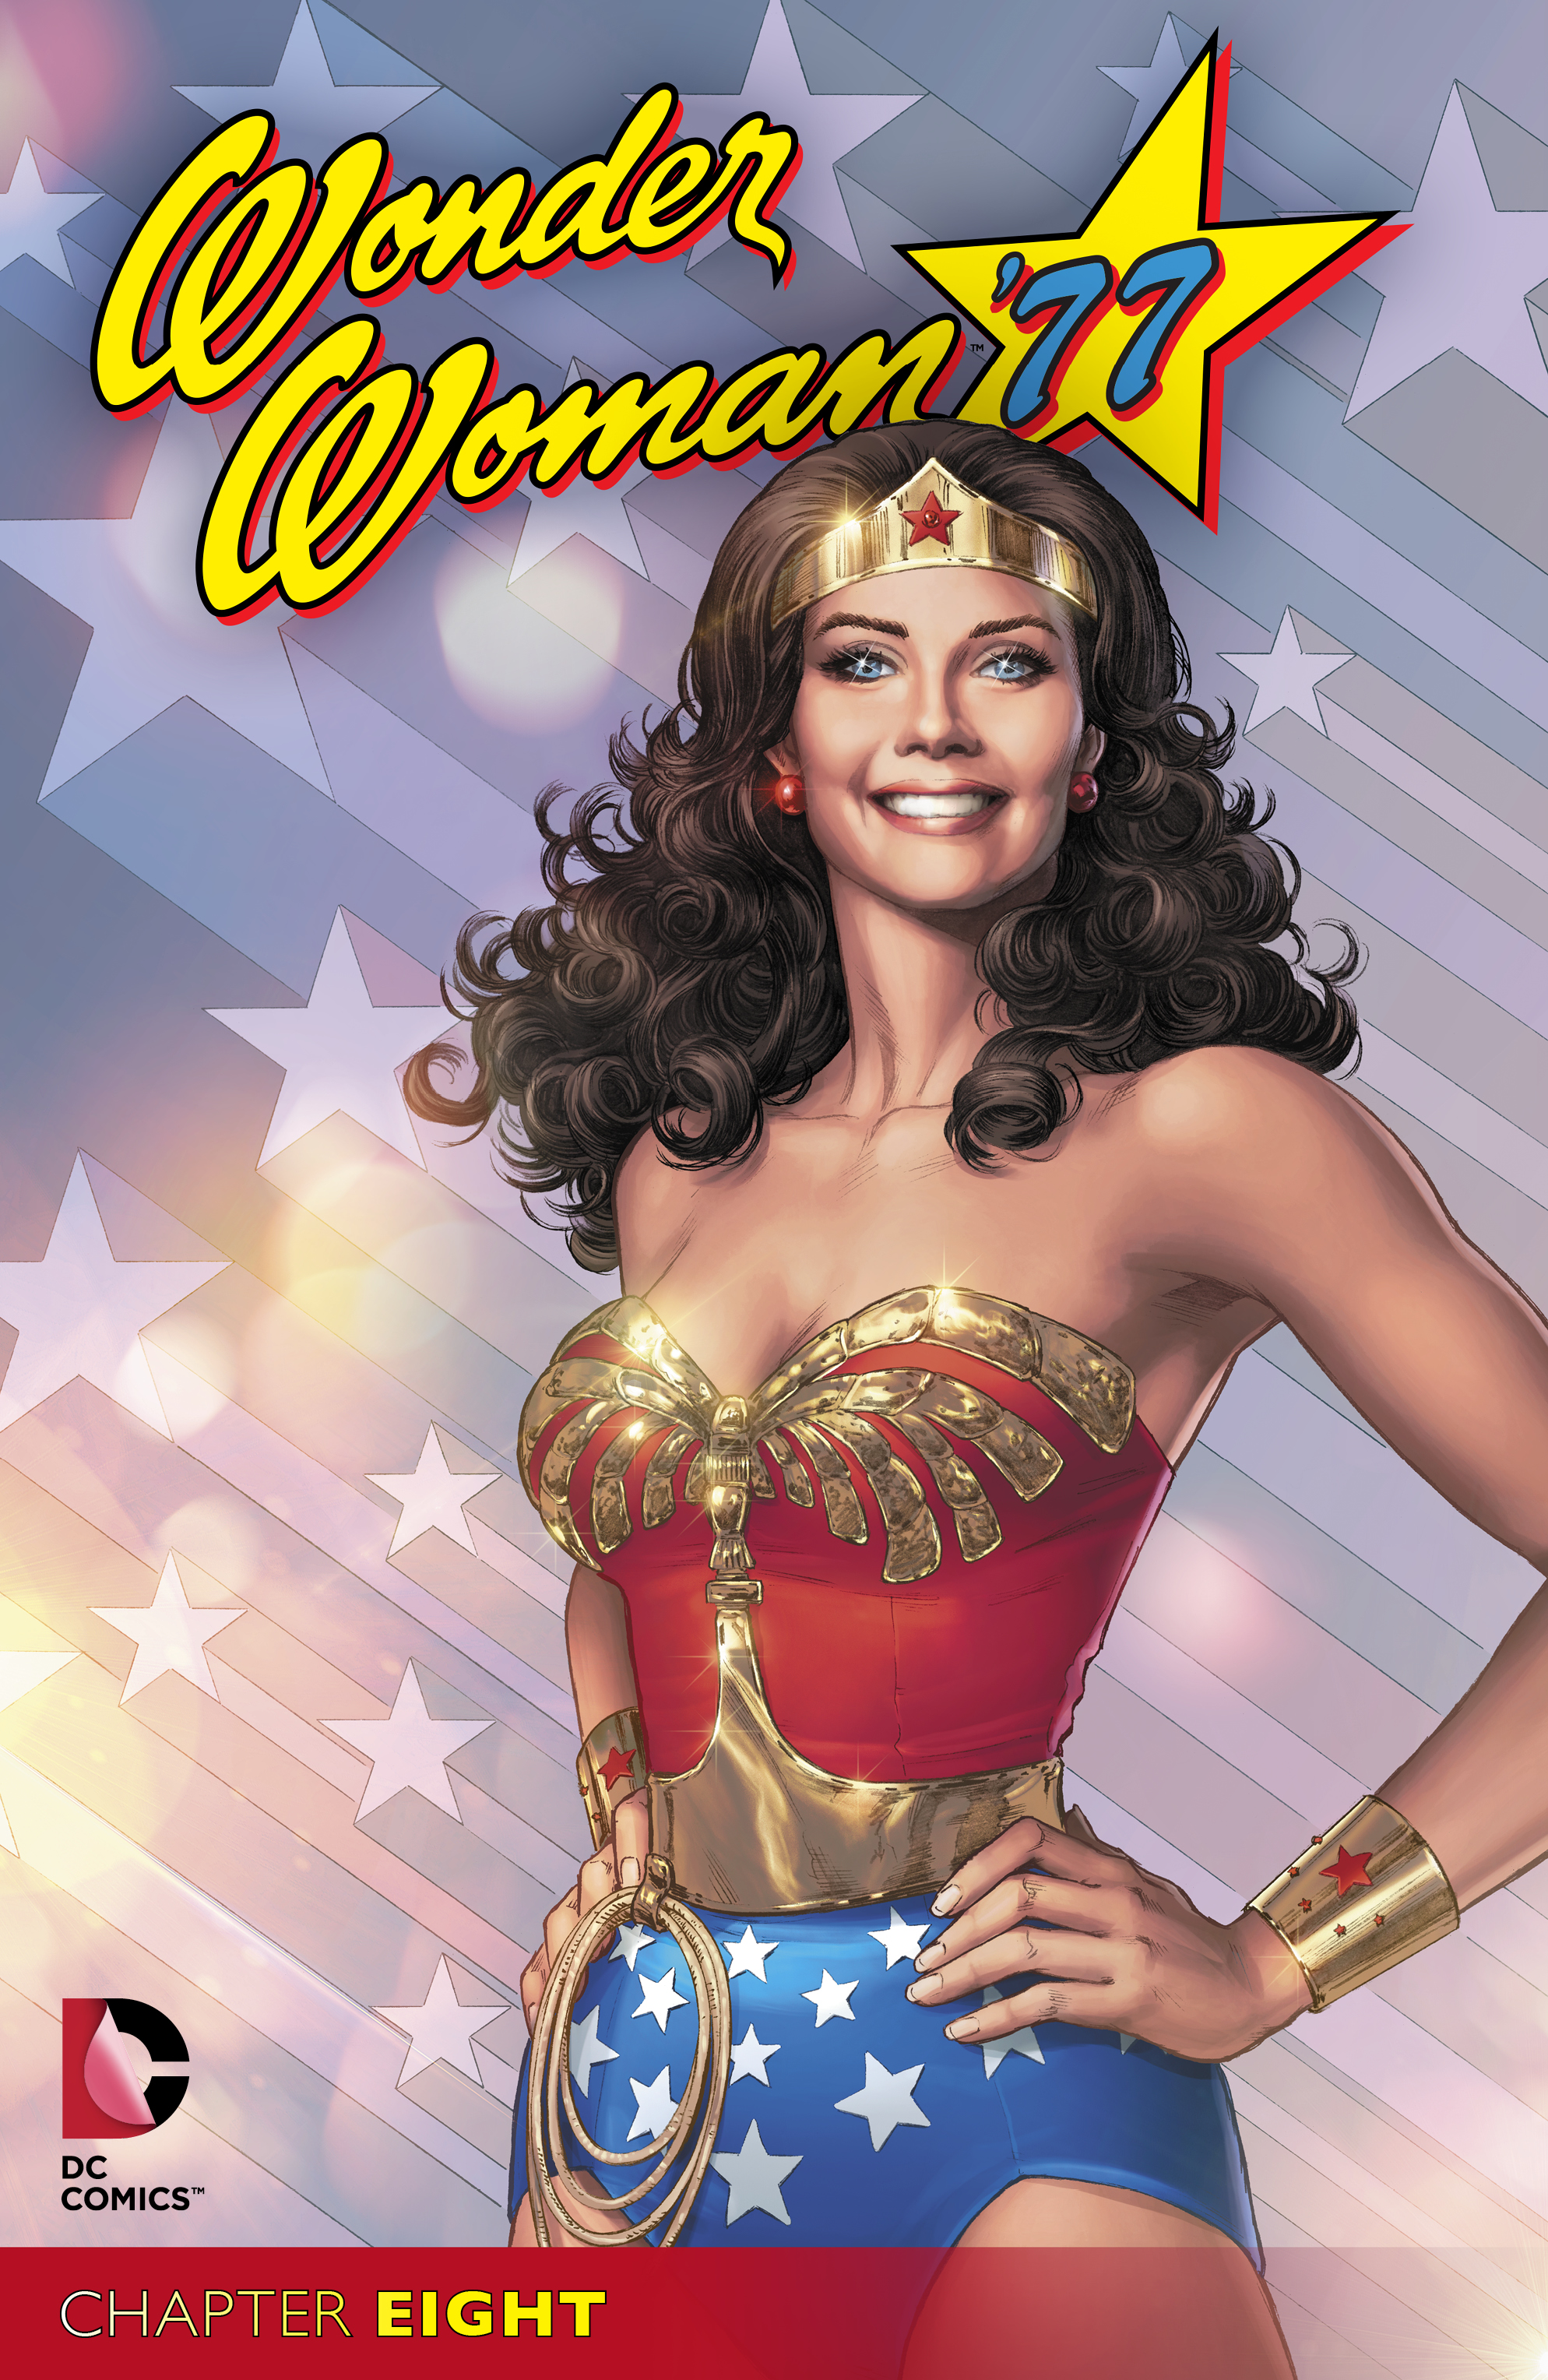 Wonder Woman '77 #8 preview images